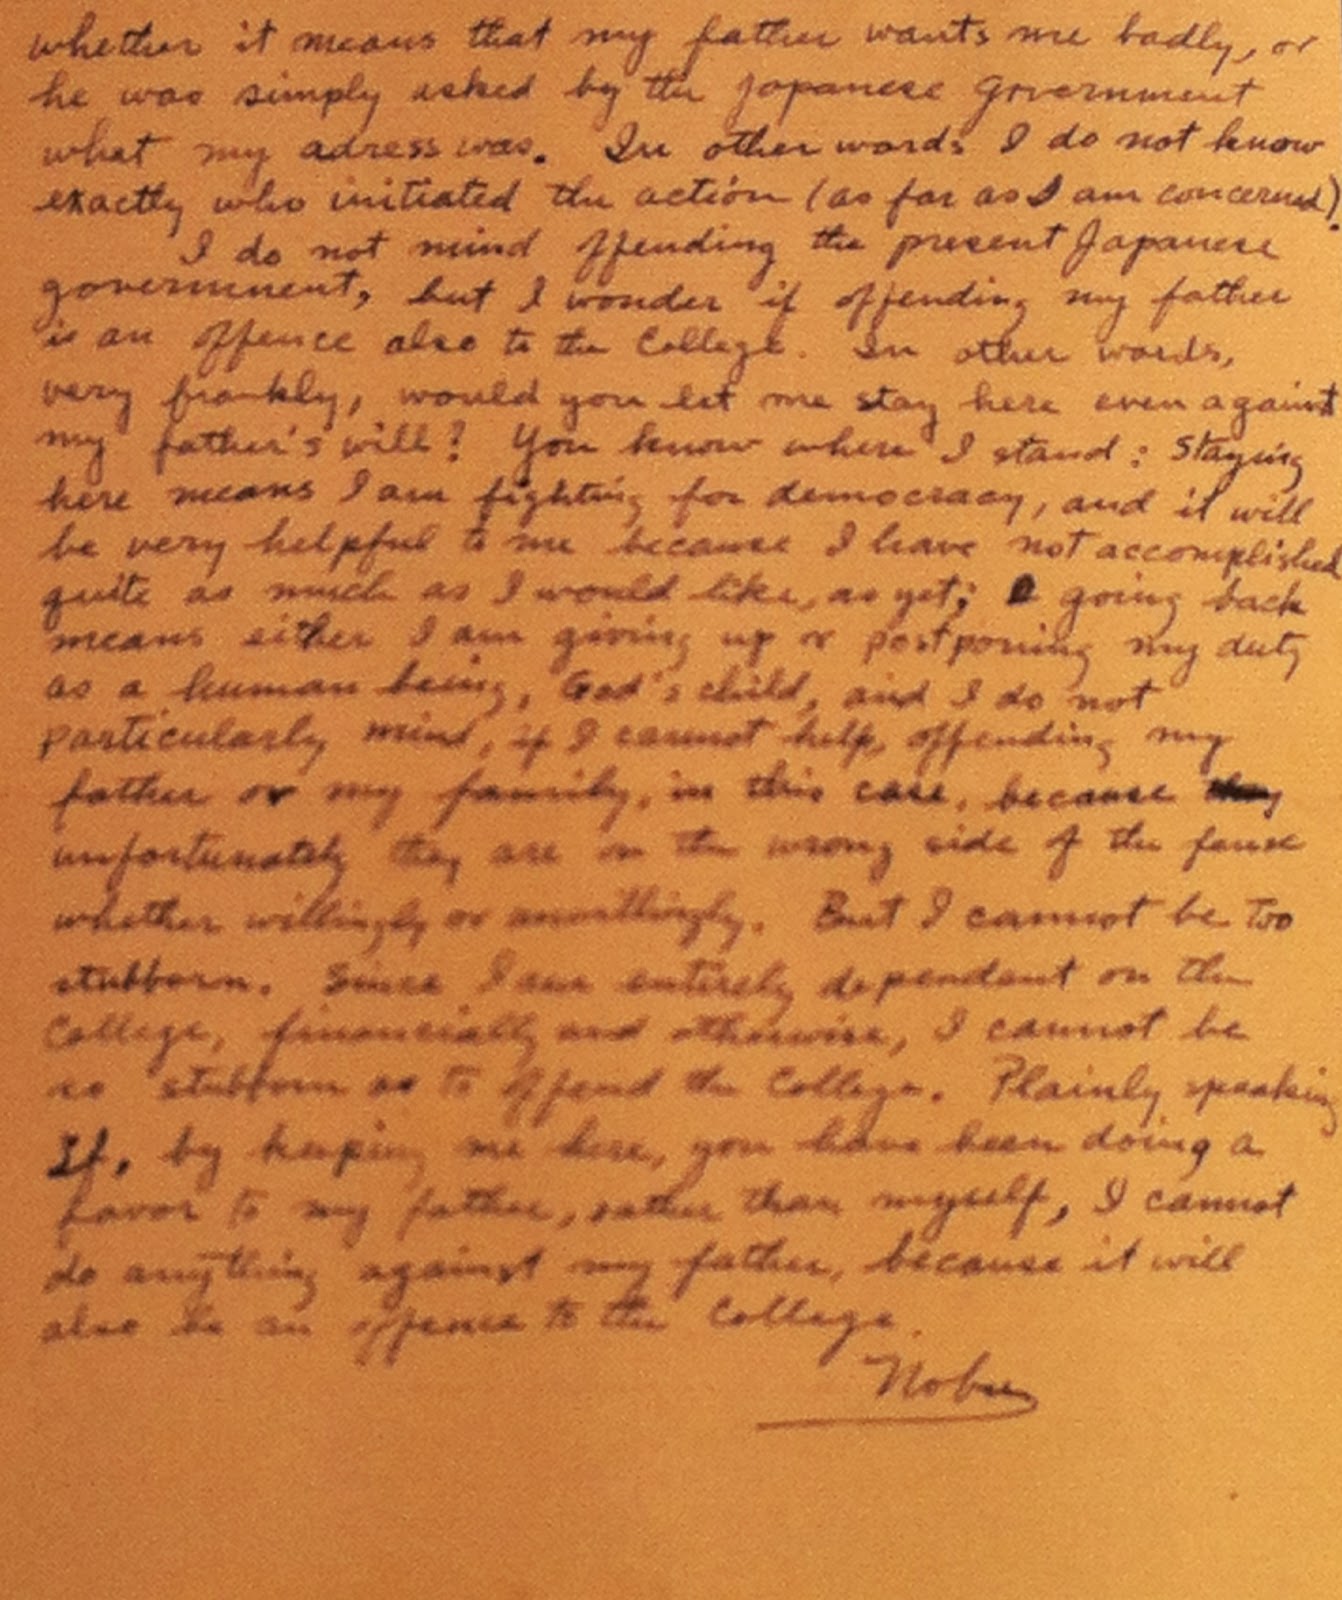 A handwritten page of text.